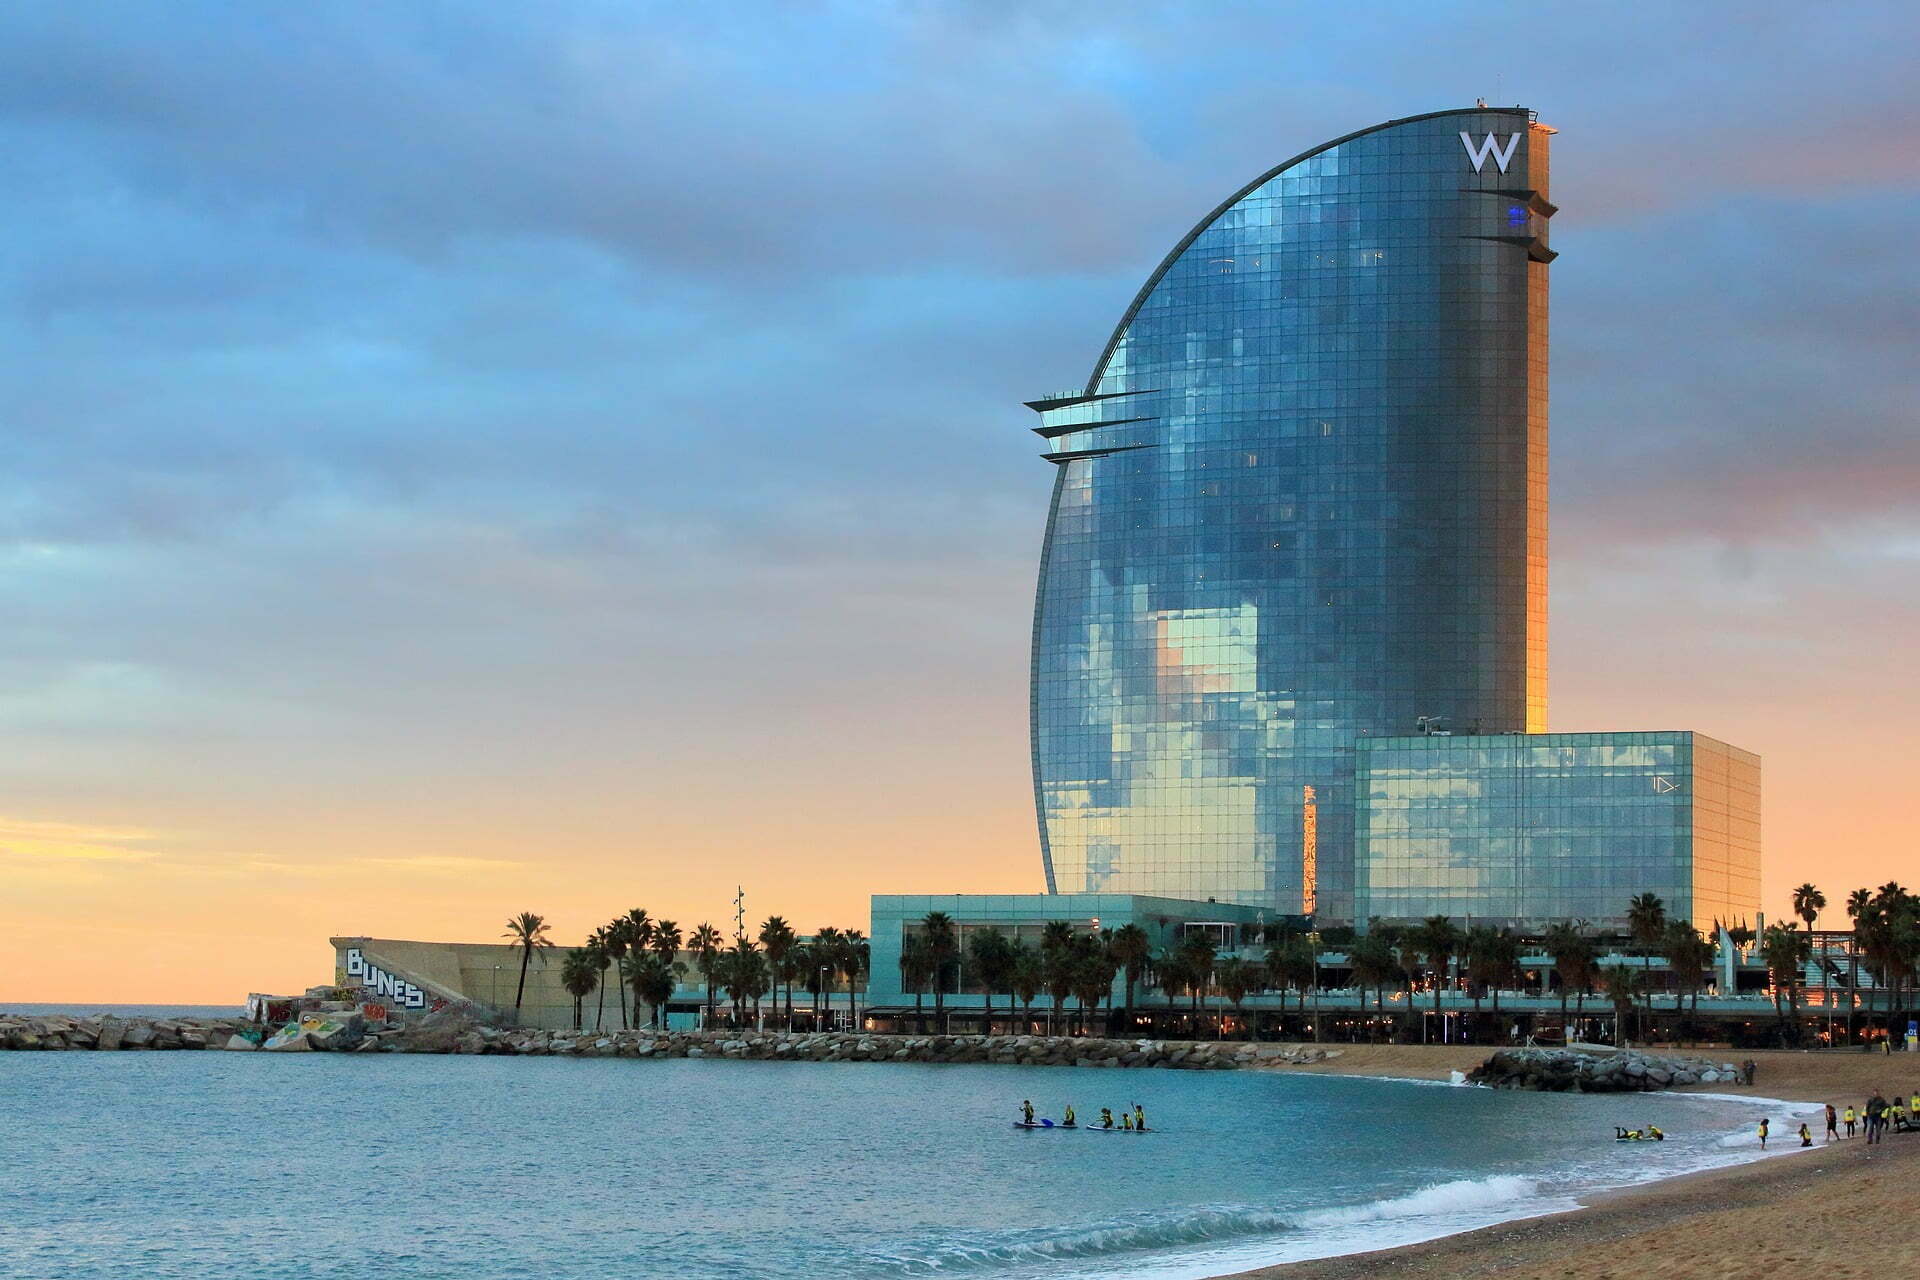 Find your next place to stay in Barcelona